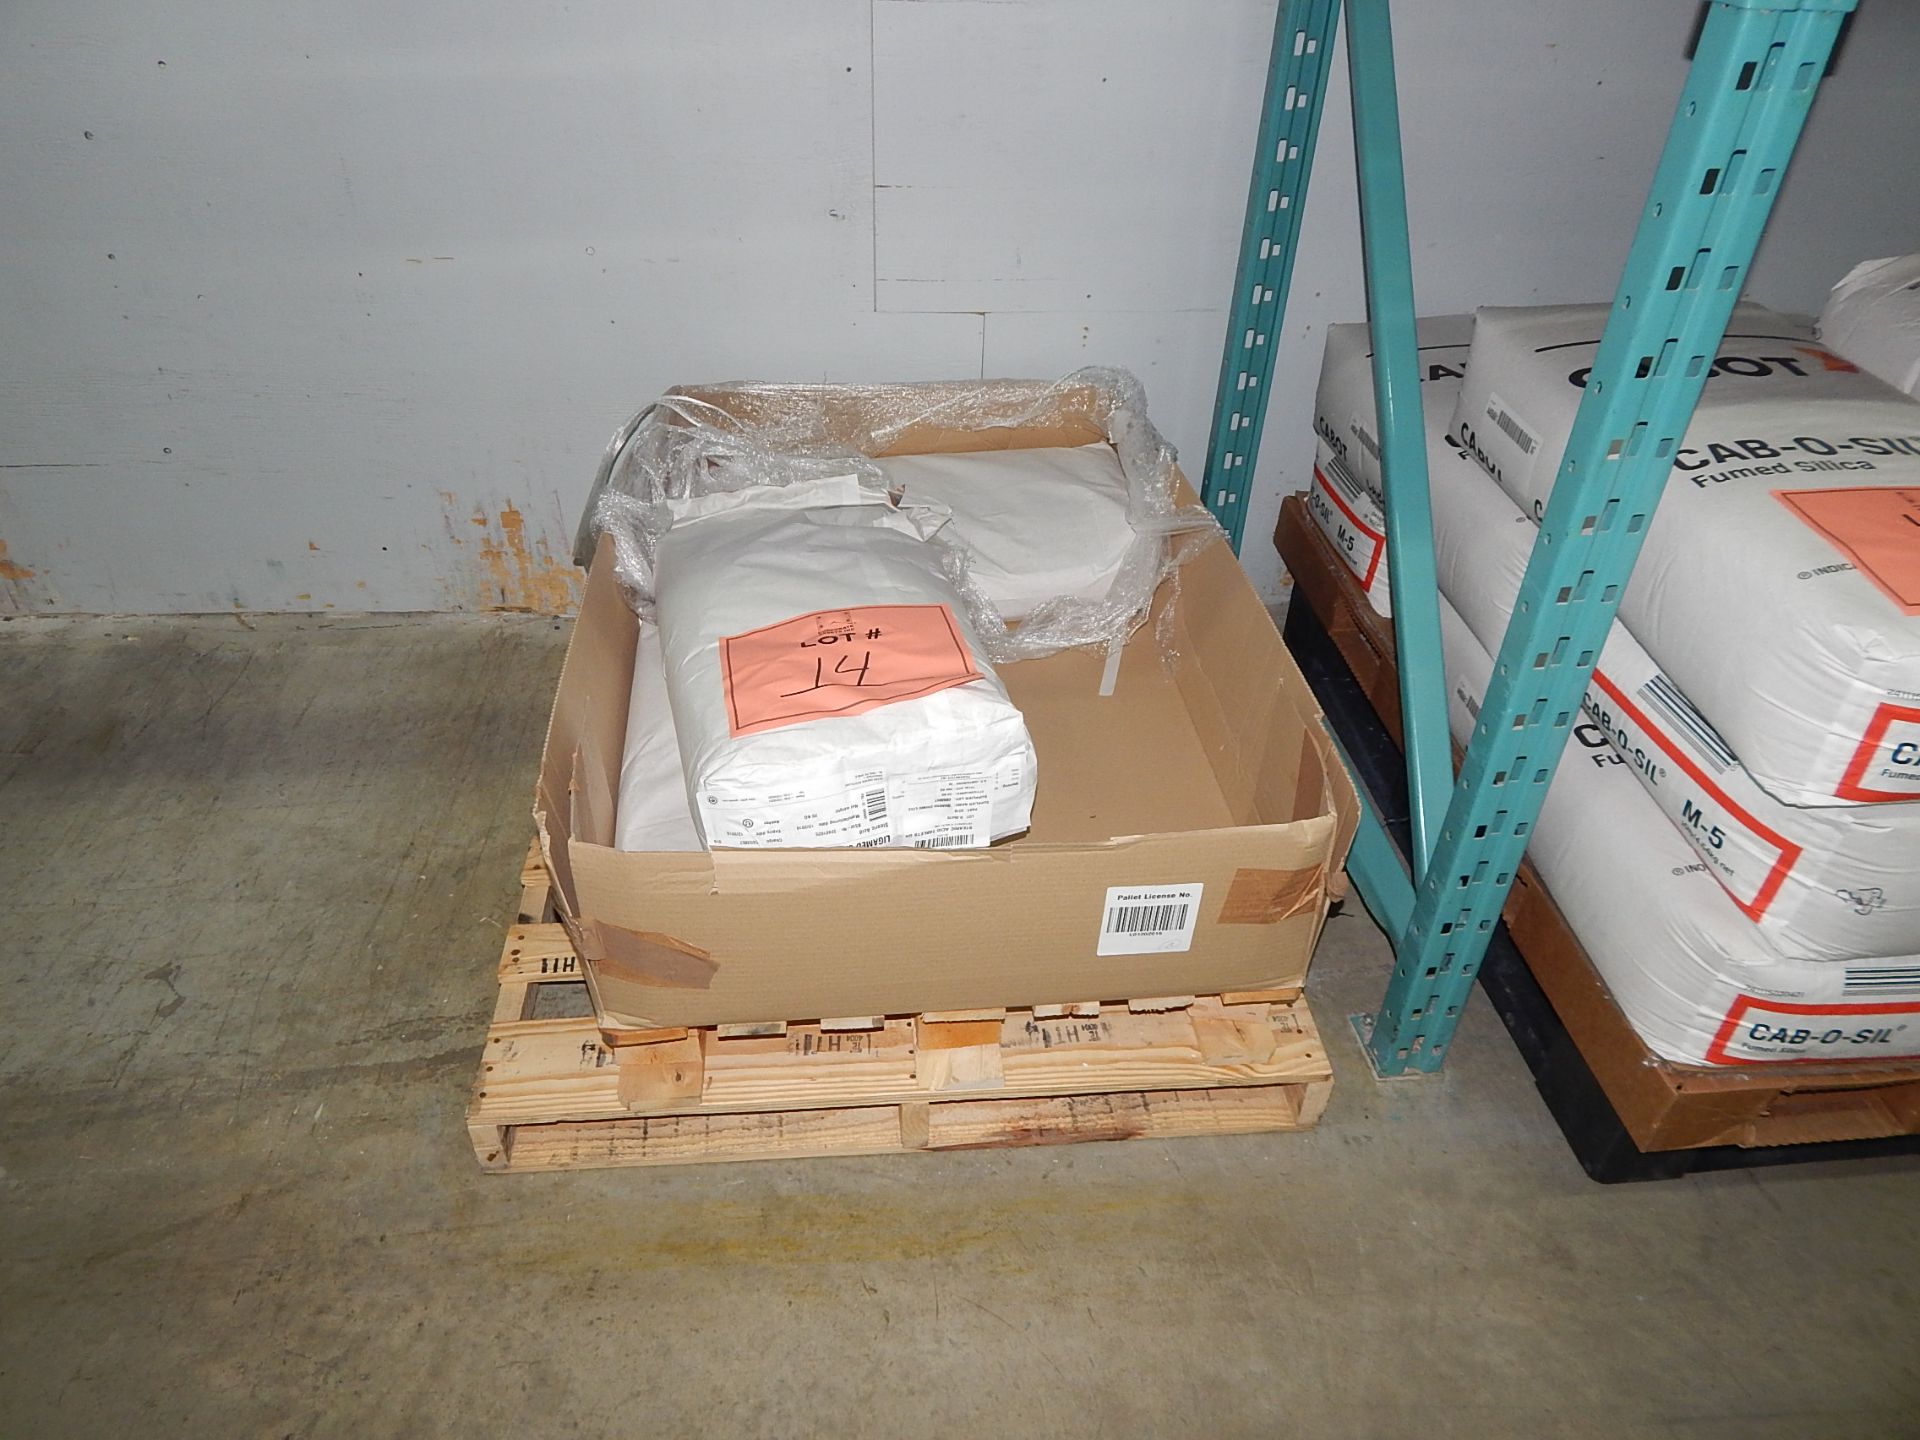 LOT/ SKID WITH CONTENTS CONSISTING OF 20KG BAGS OF STEARIC ACID TABLETS